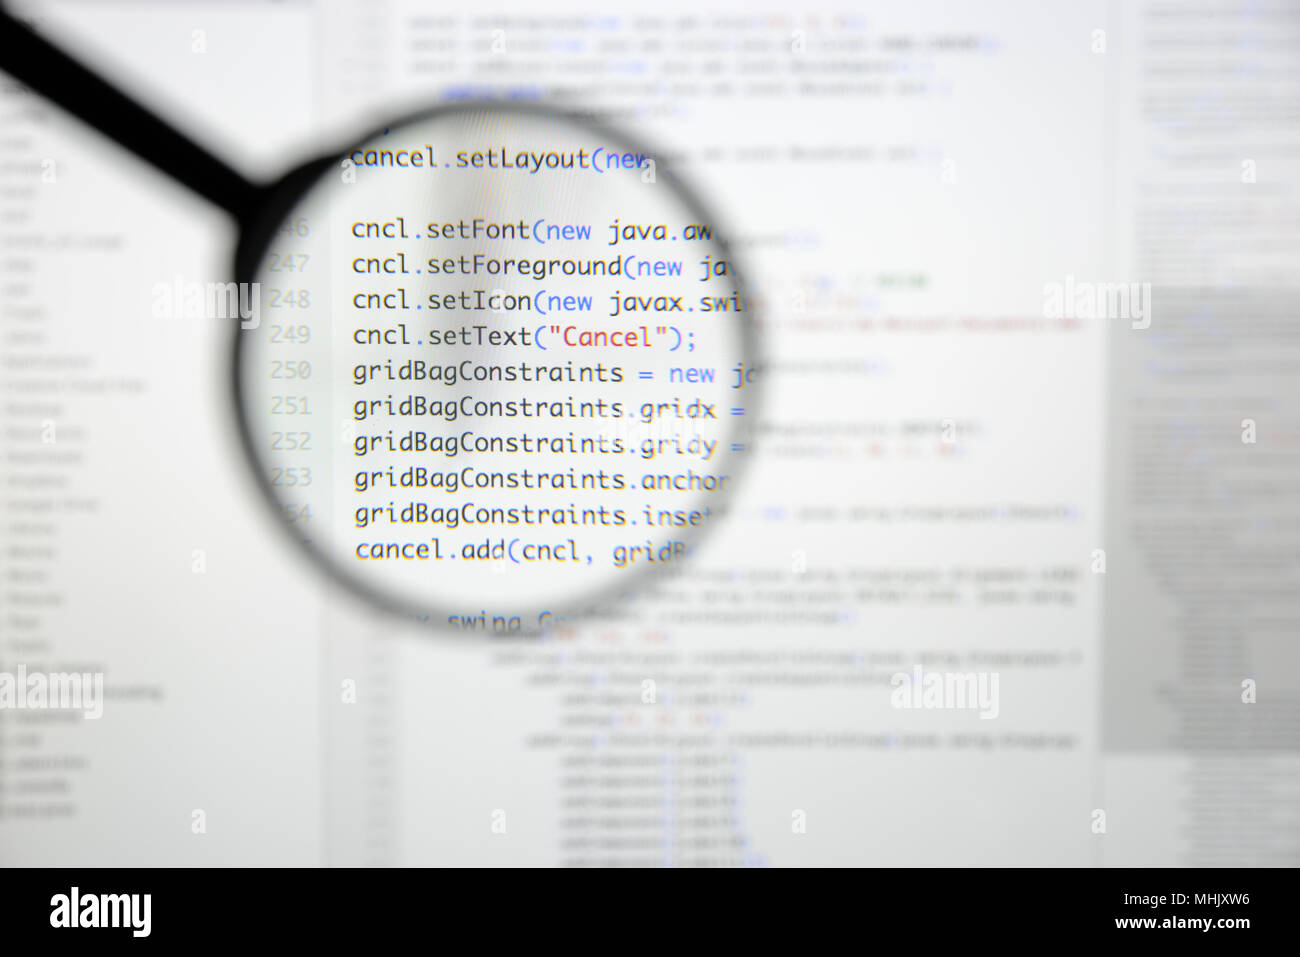 Real Java code developing screen. Programing workflow abstract algorithm concept. Lines of Java code visible under magnifying lens. Stock Photo